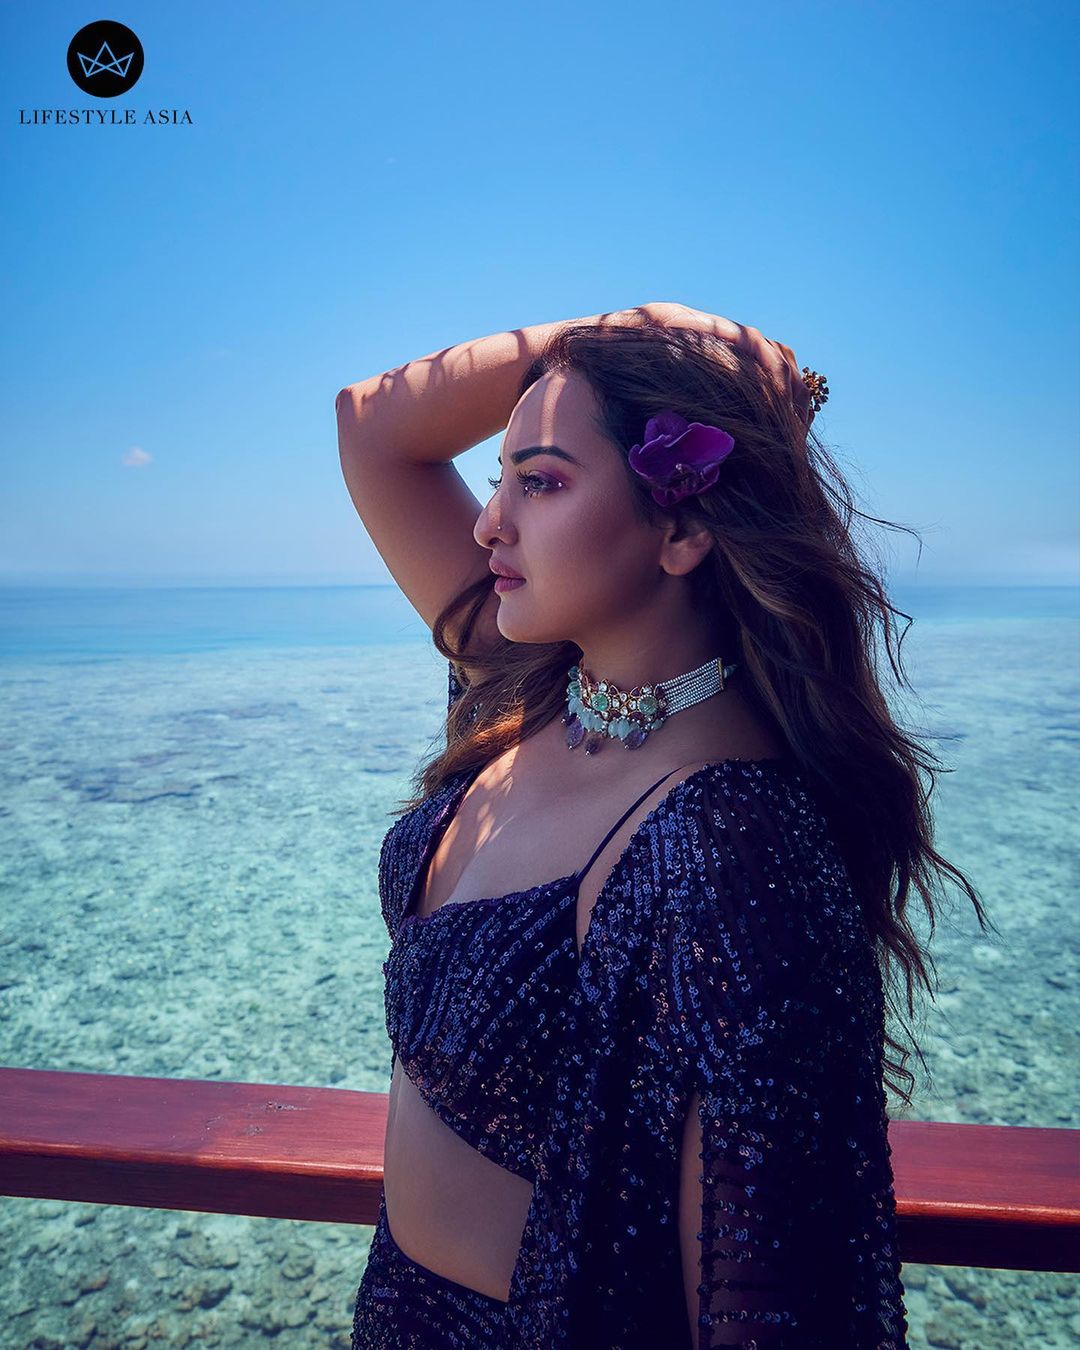 Sonakshi Sinha Ke Sex Boor Ke Photo - Sonakshi Sinha Goes Glam In Sequinned Outfits During Her Photoshoot In  Maldives, Here's A Glimpse Of Her Sexy Pics - News18